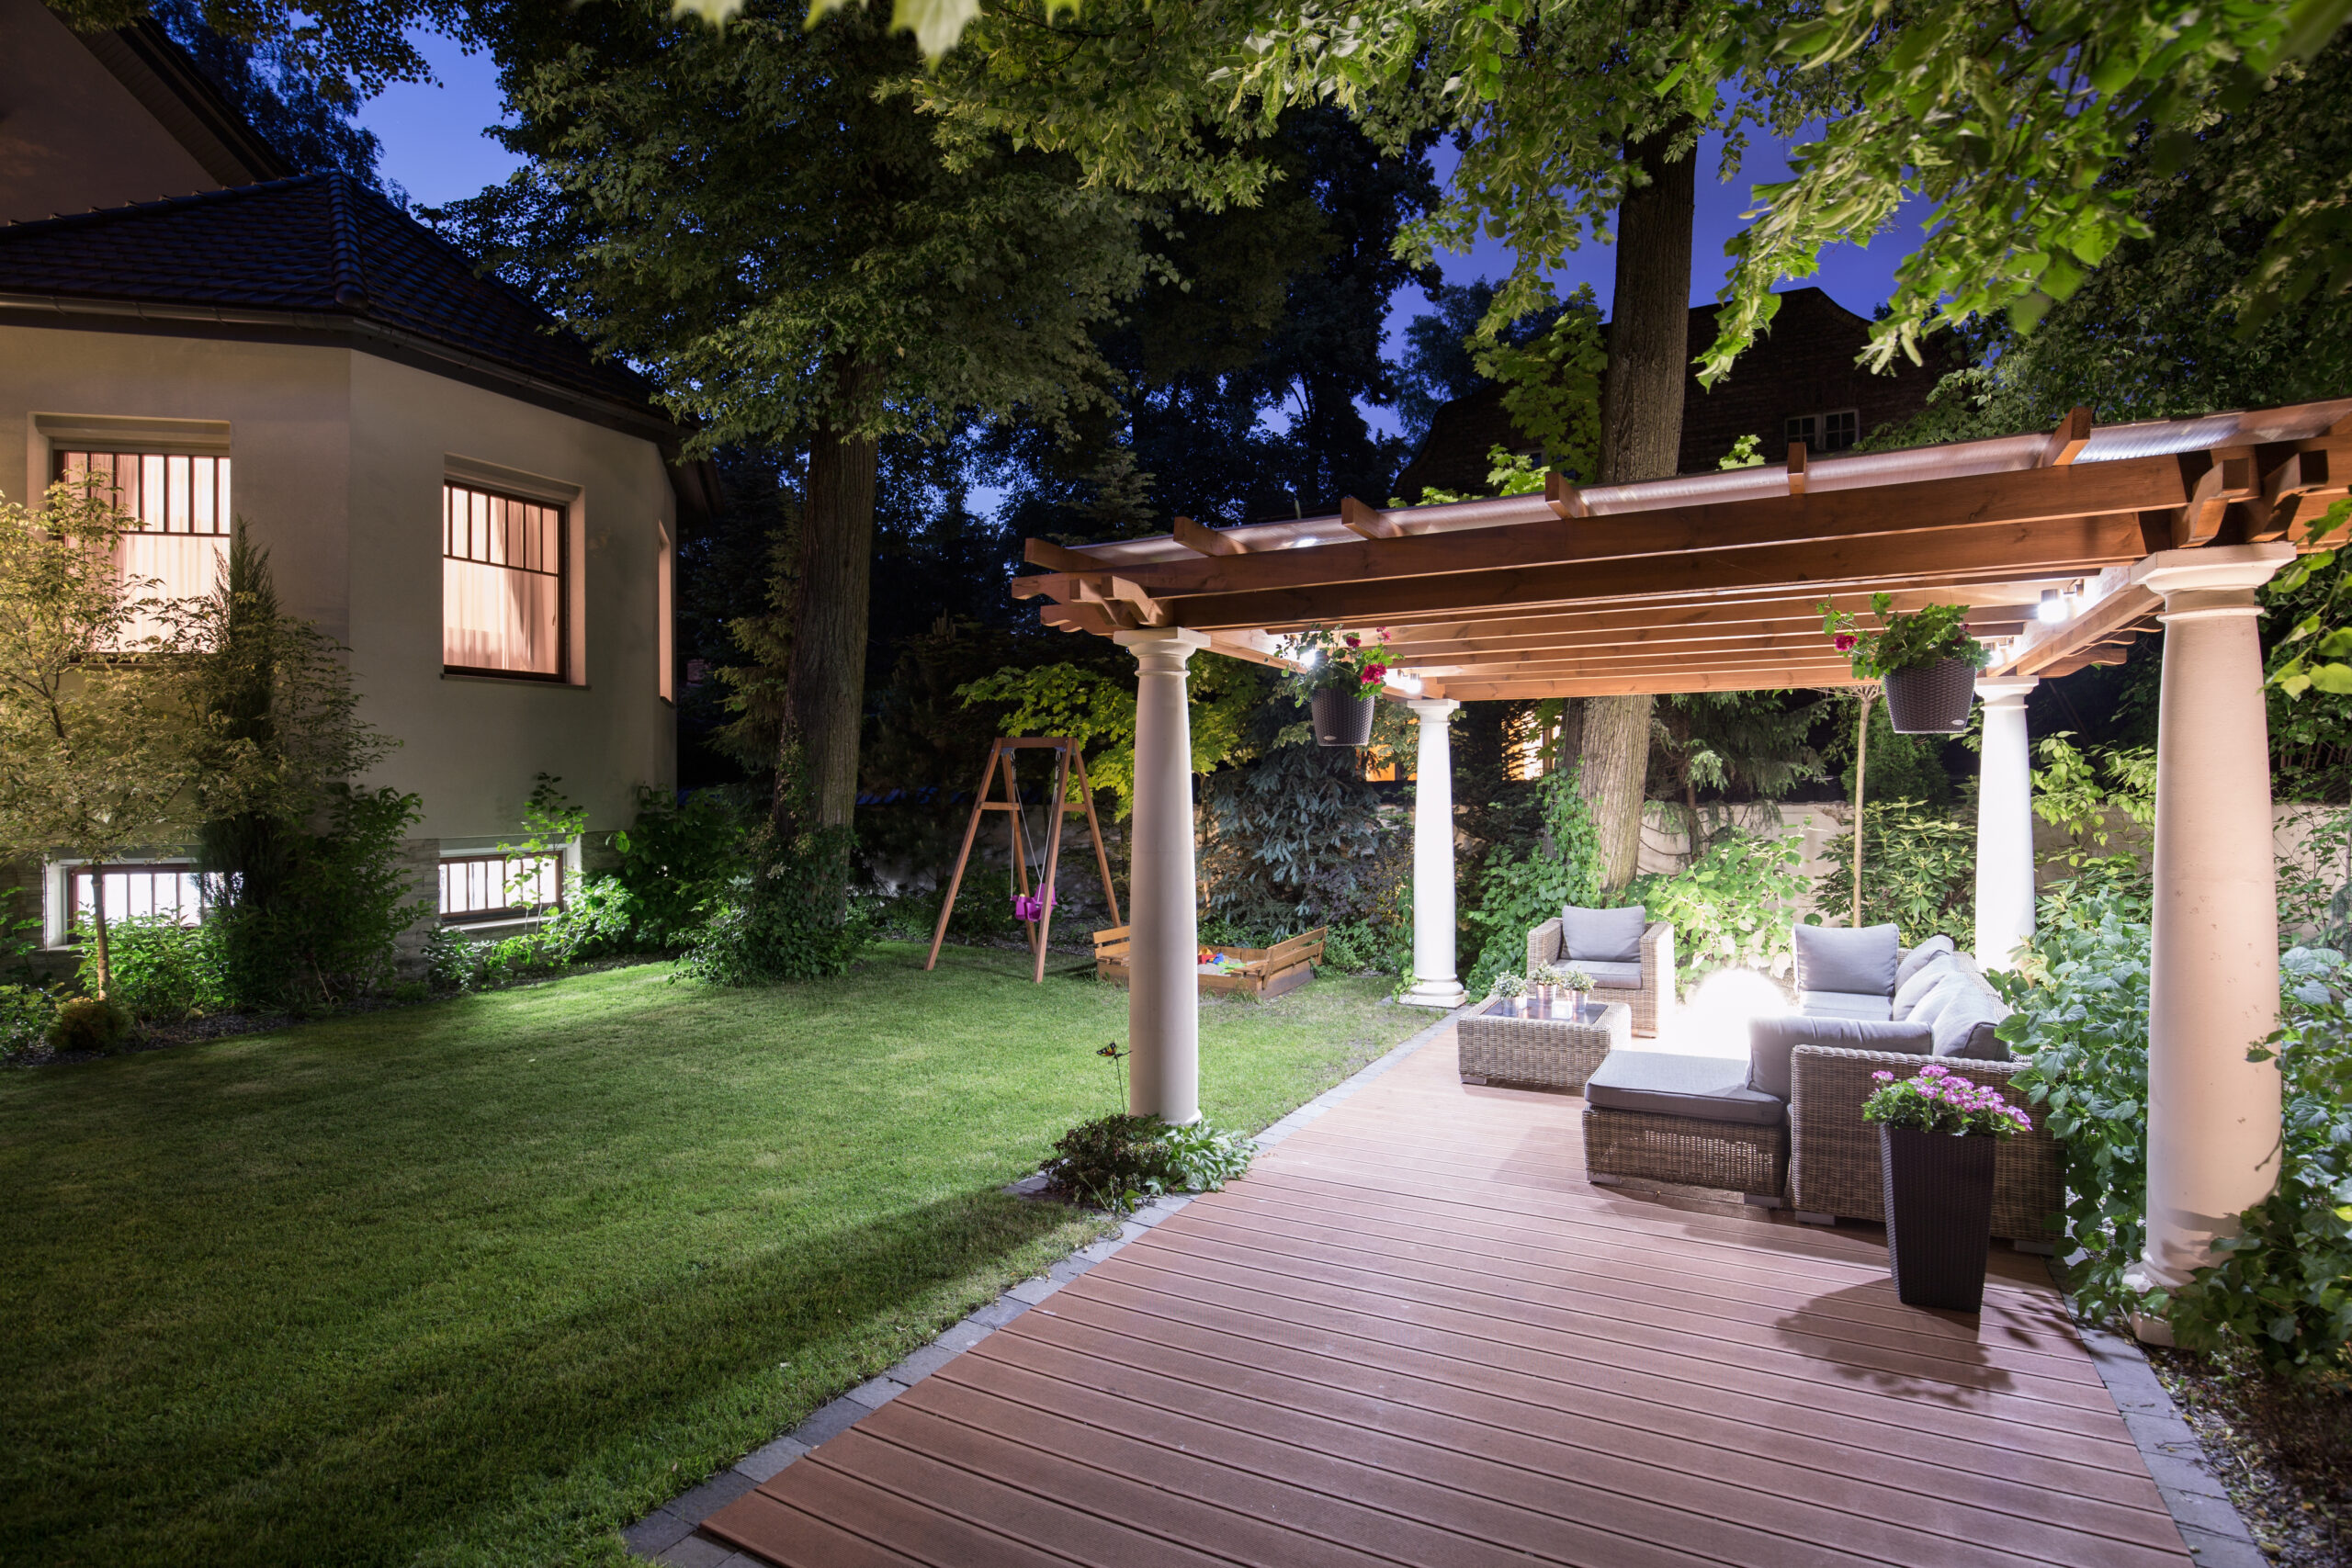 lighted backyard seating area at dusk